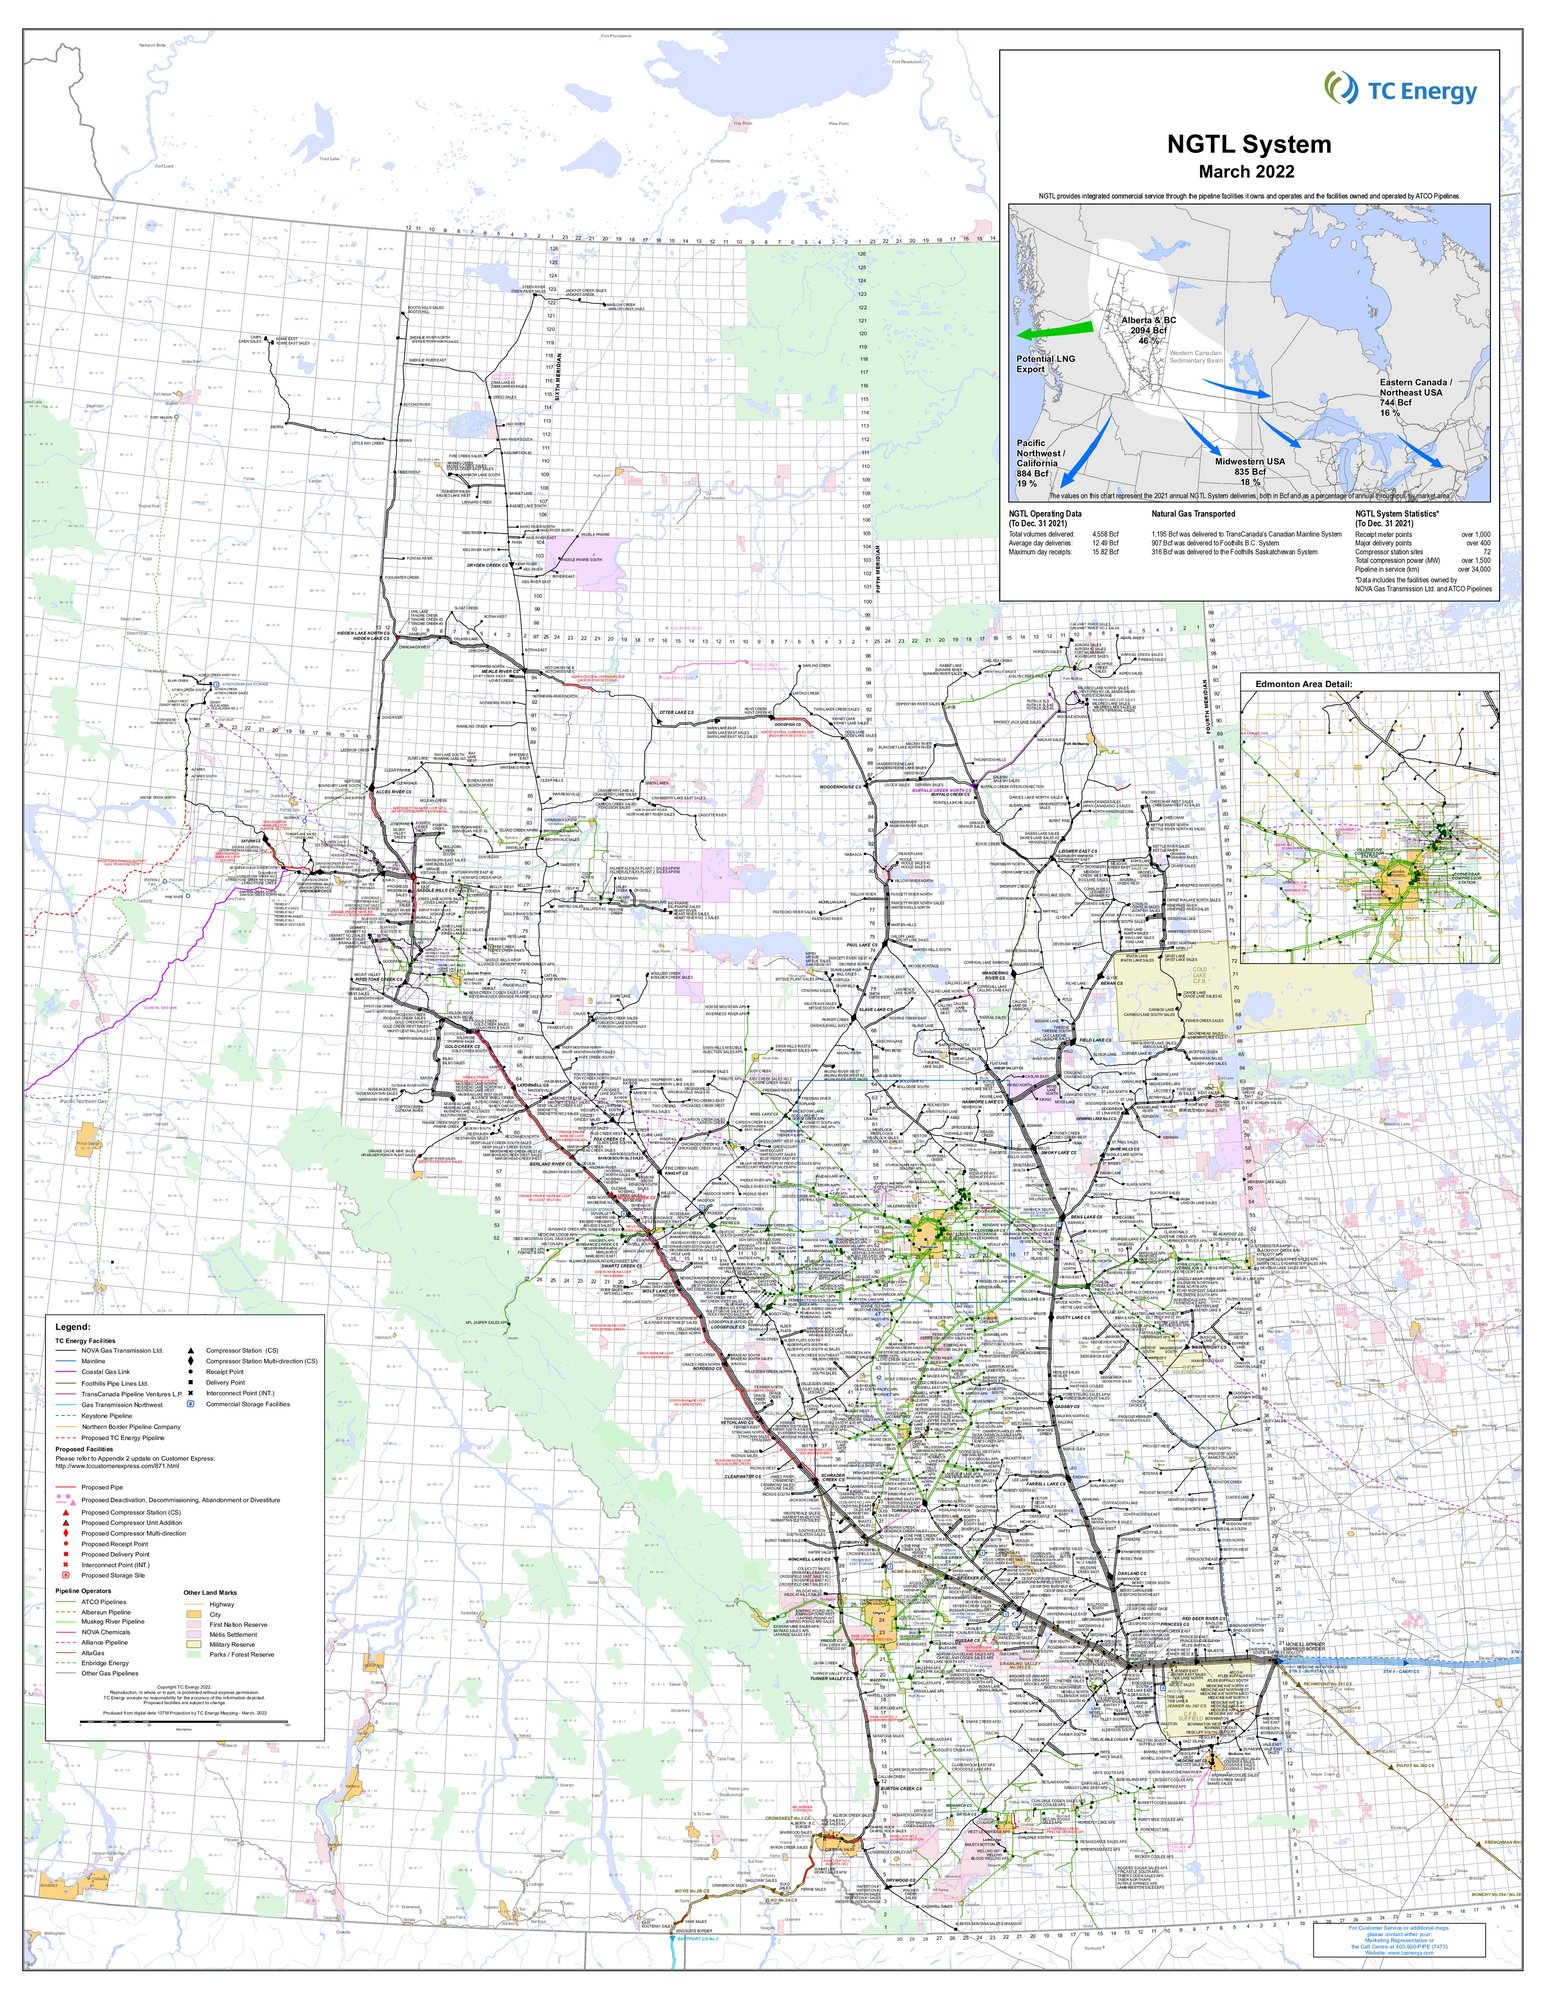 County of Grande Prairie No 1, facilities and pipelines ​